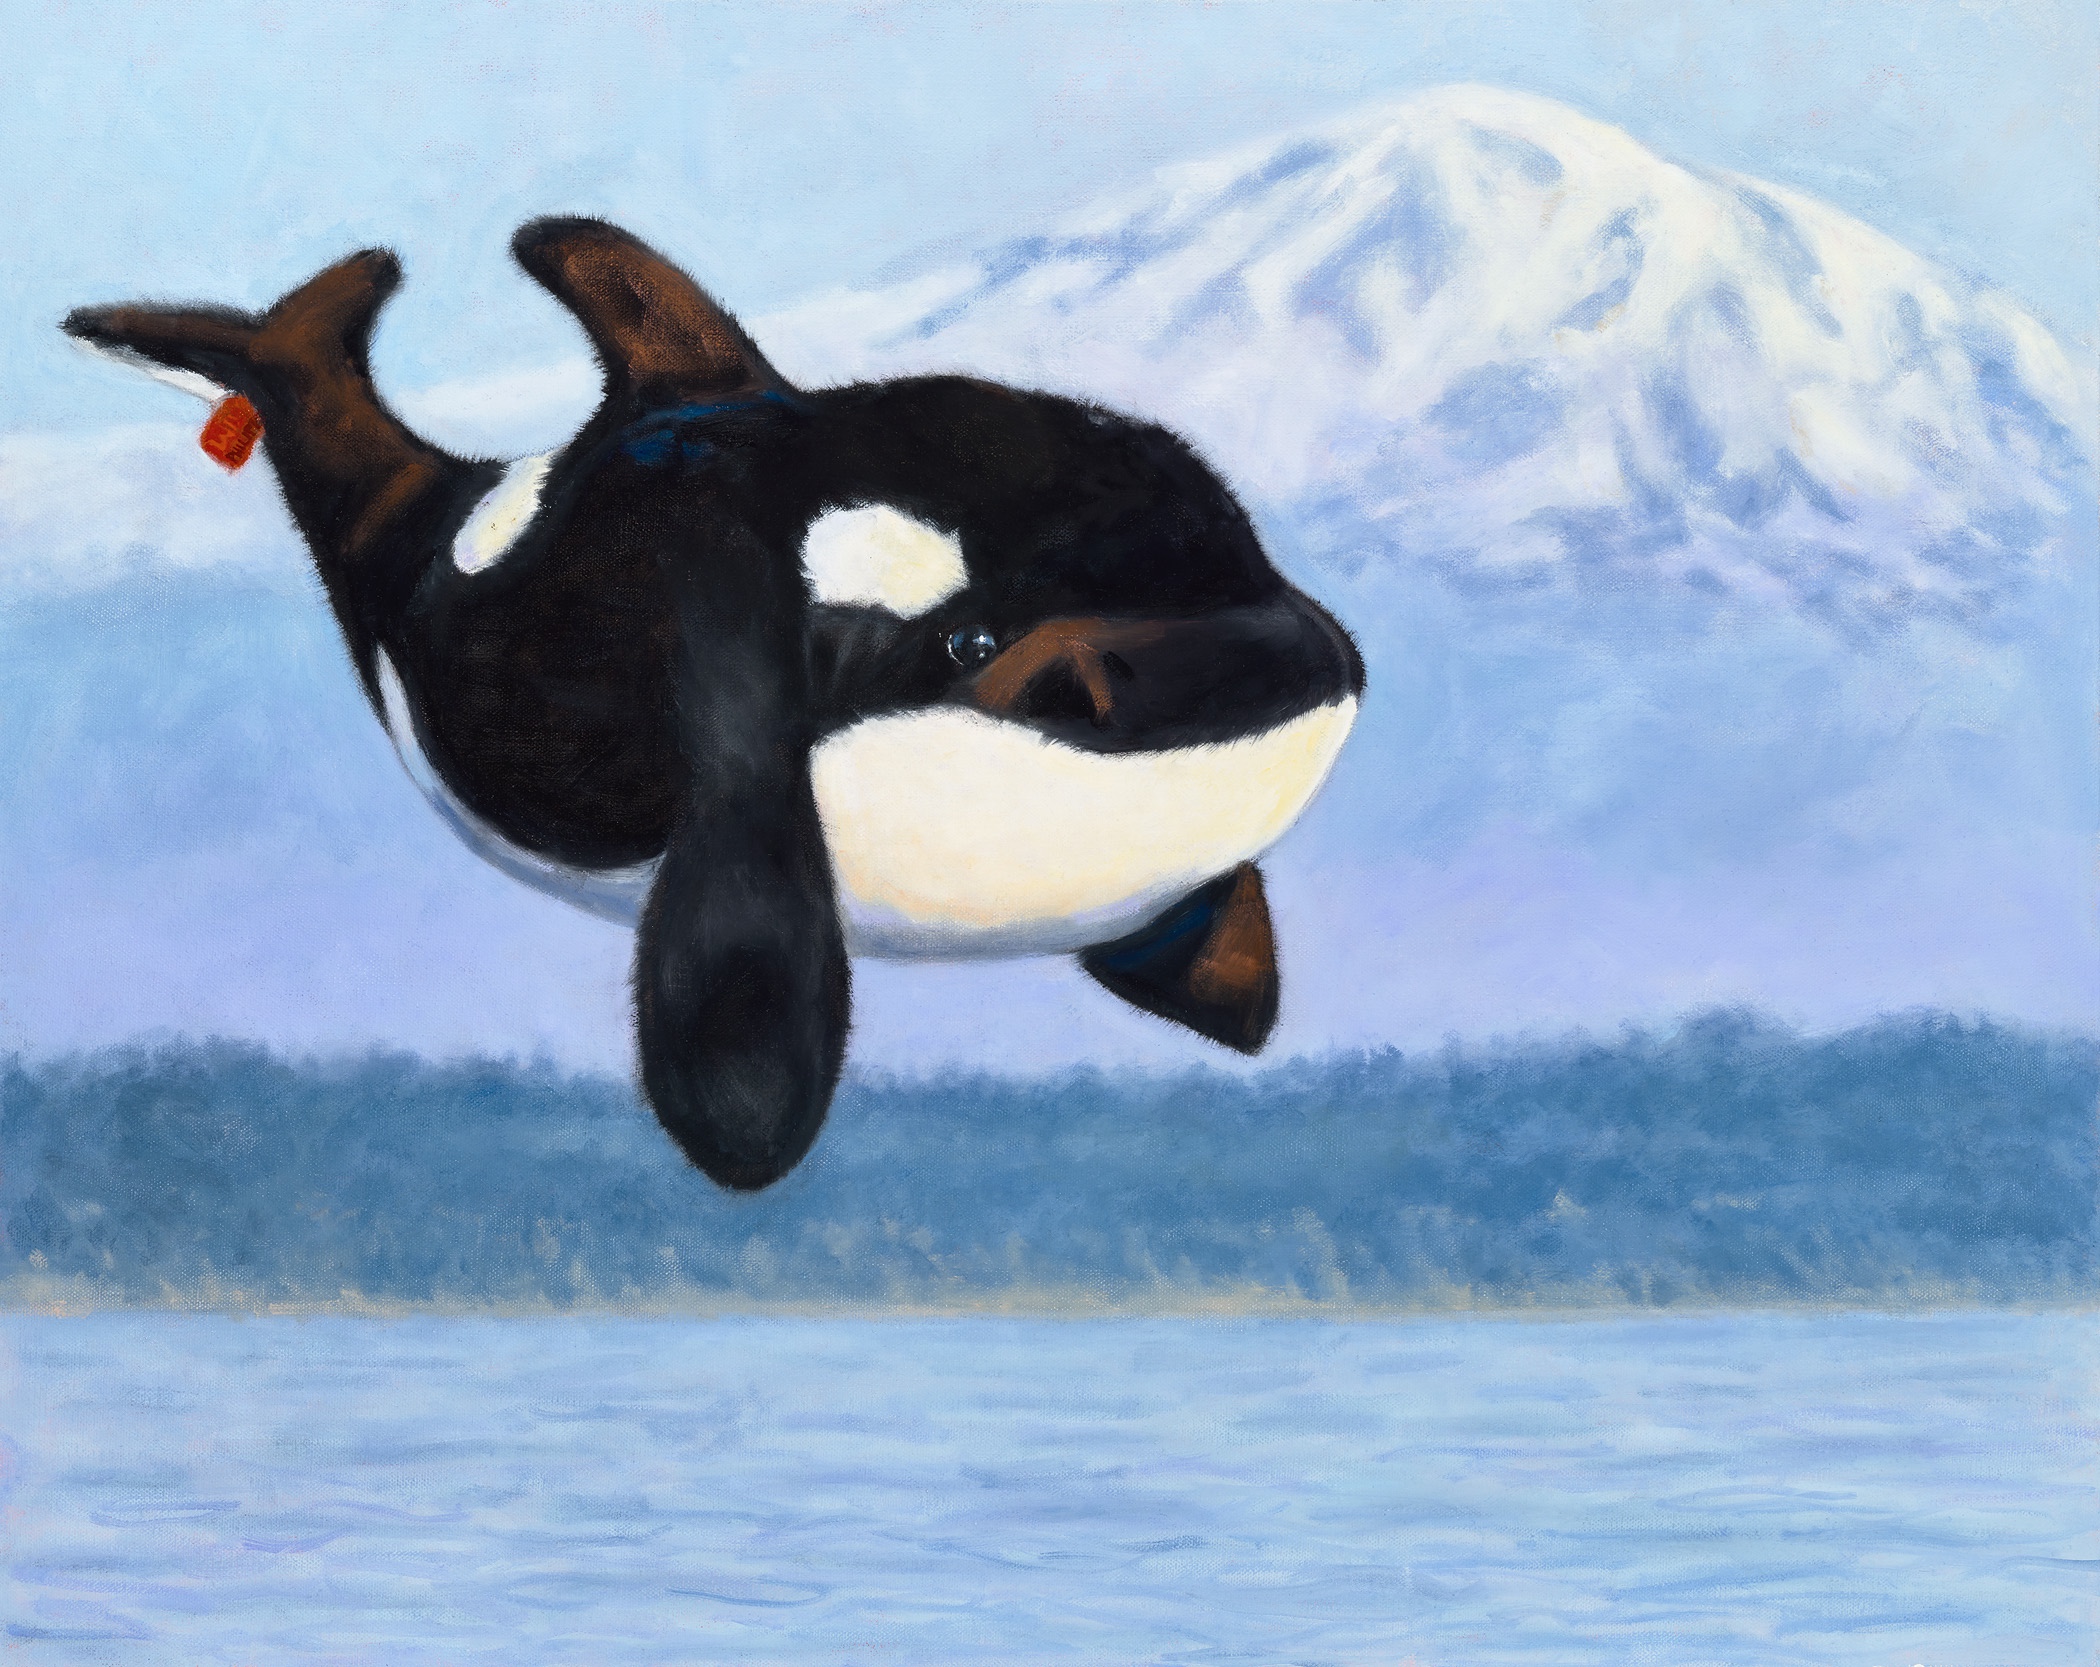 "Last Call: Orcas", Oil on Gallery Wrapped Canvas, copyright Lisa Philipps, 2019.